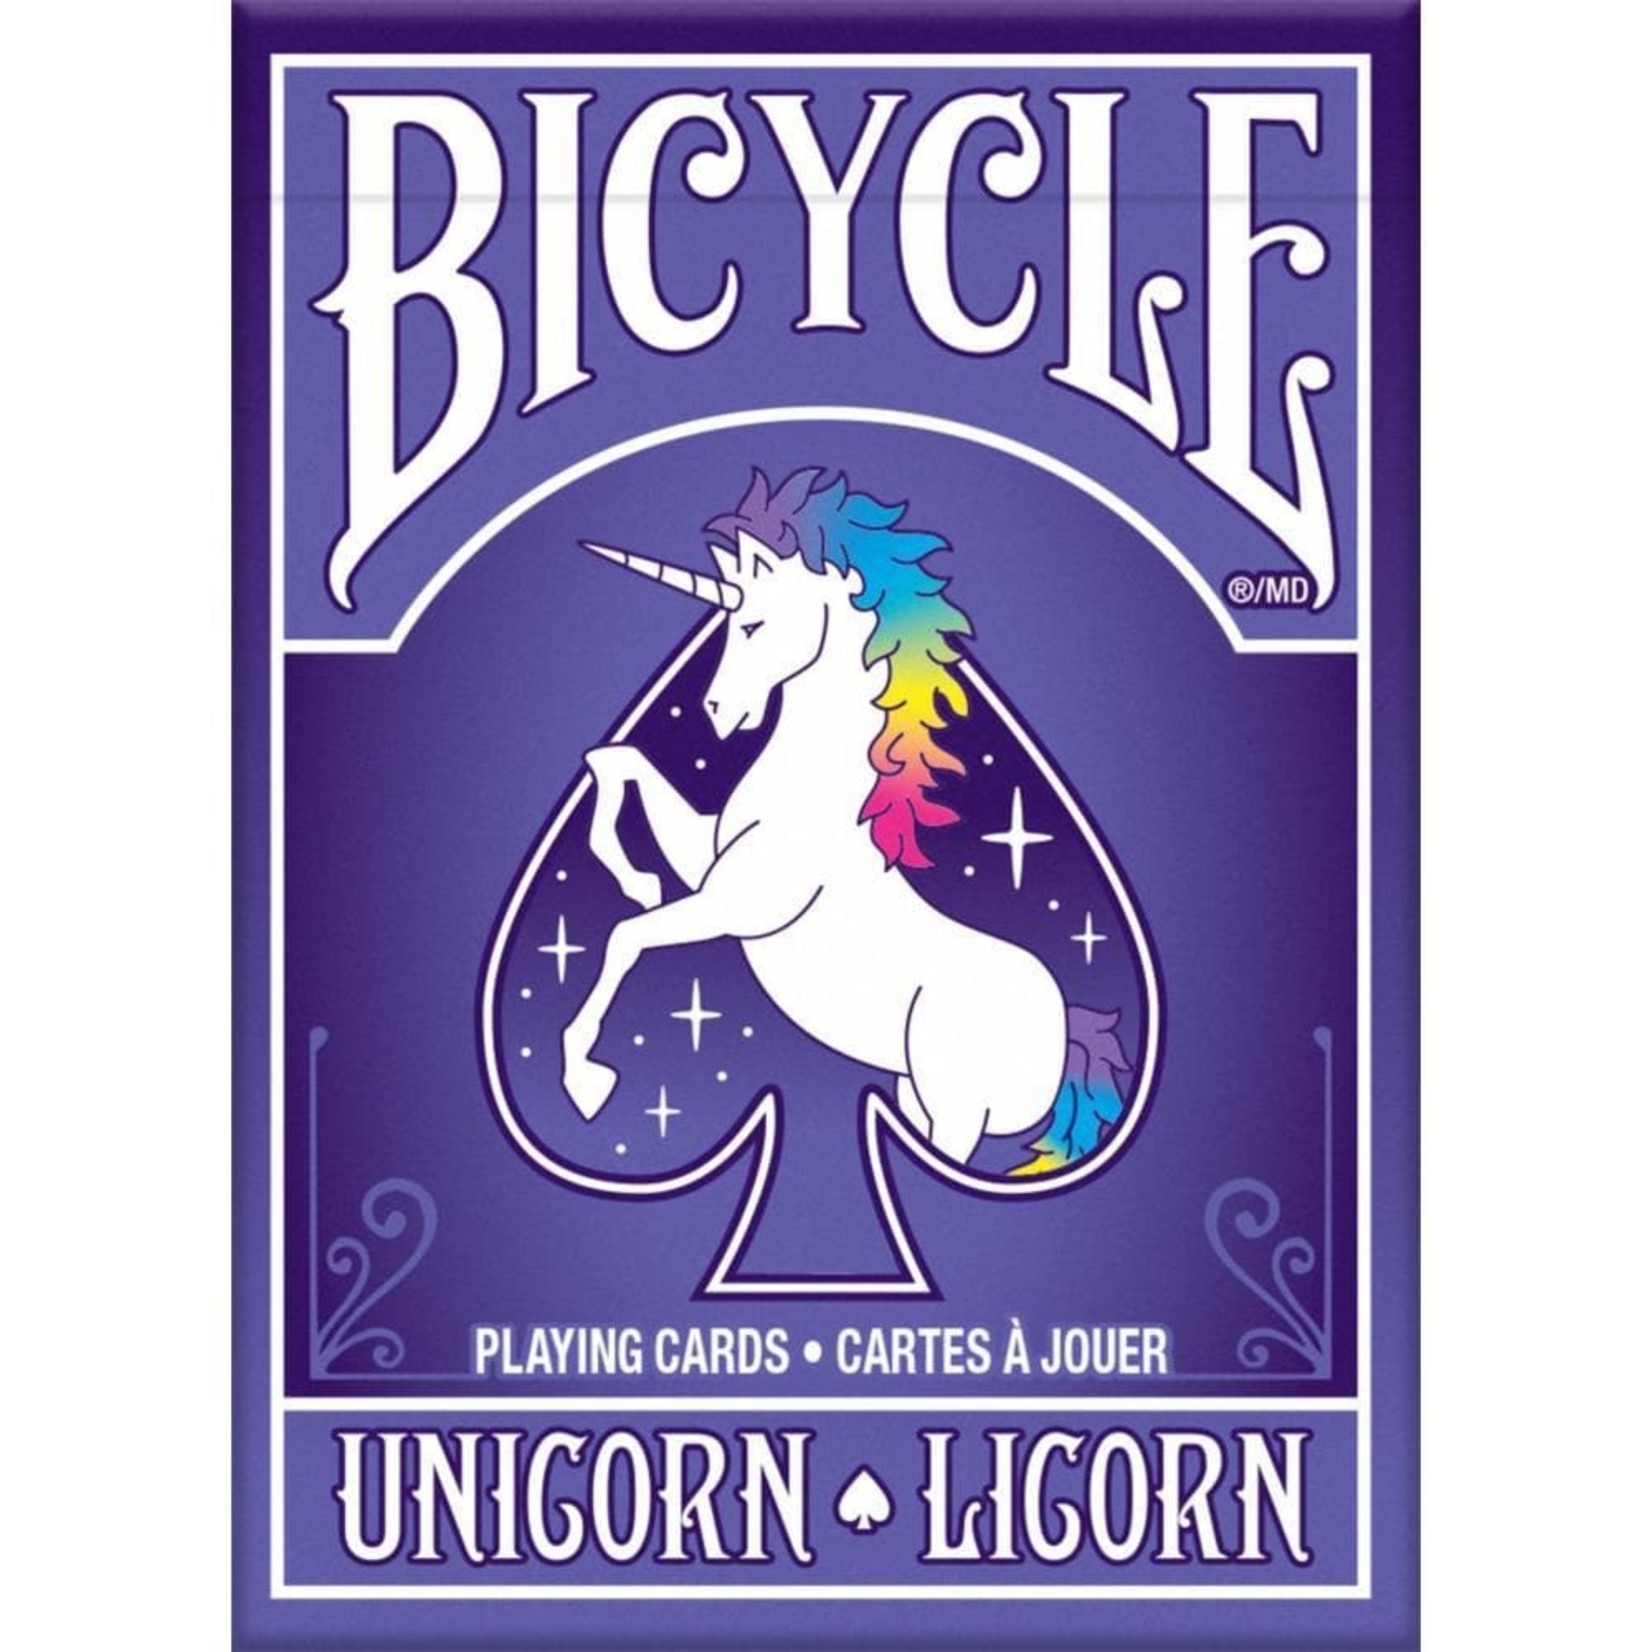 US Playing Card Co. Playing Cards Bicycle Unicorns